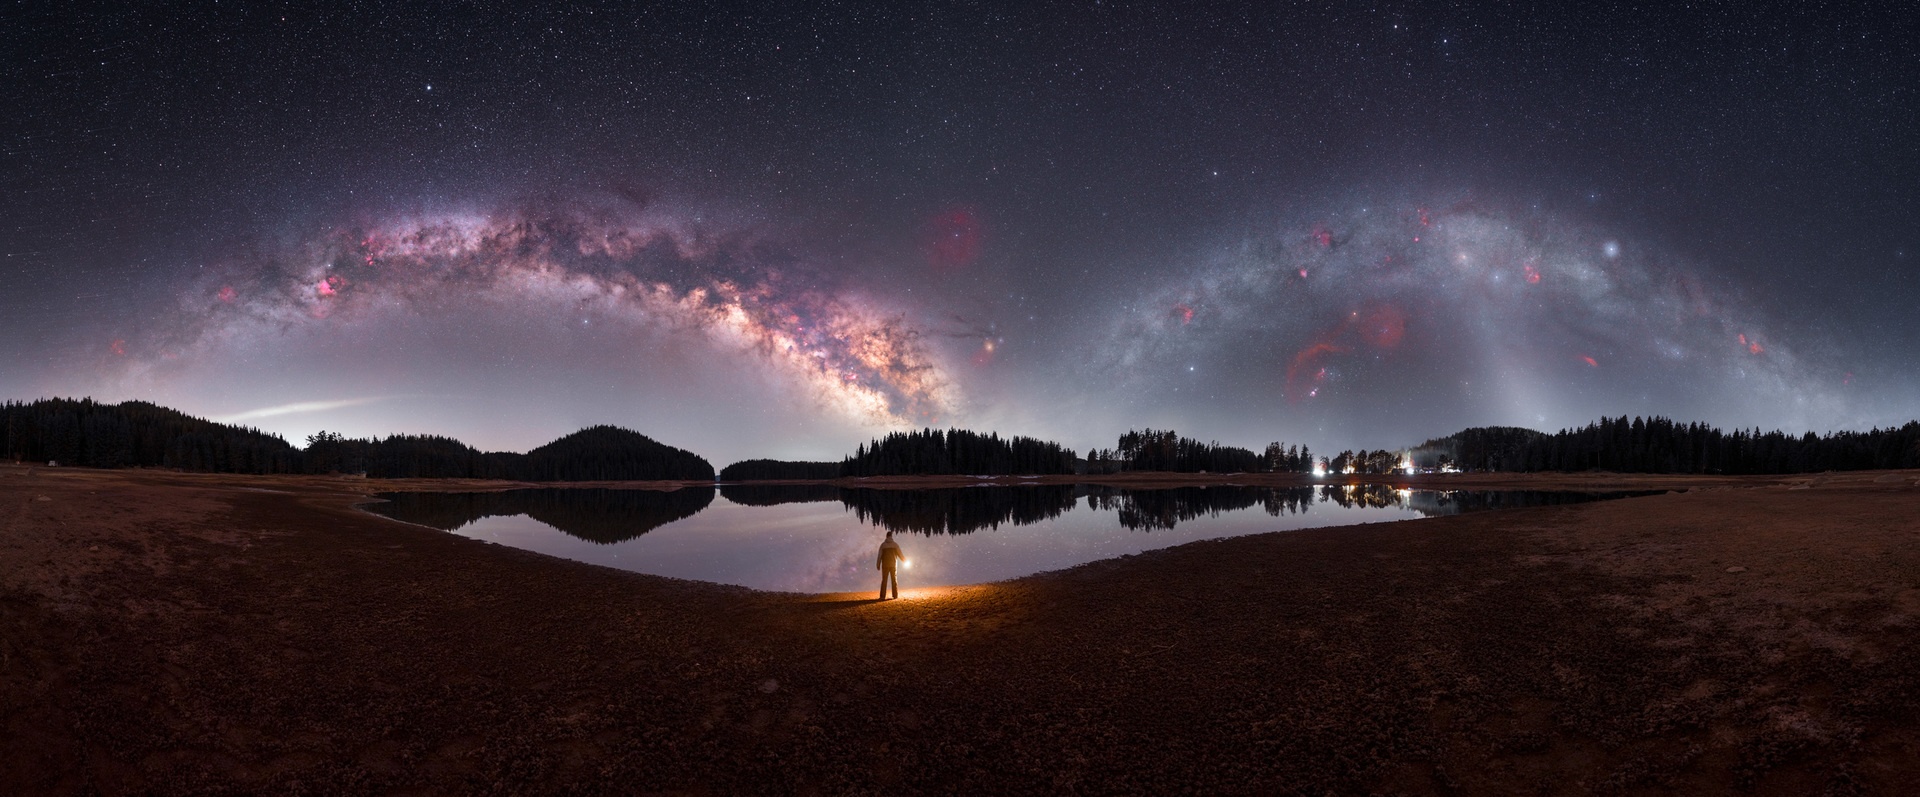 Panorama showing the summer Milky Way arc and winter Milky Way arc in a single image